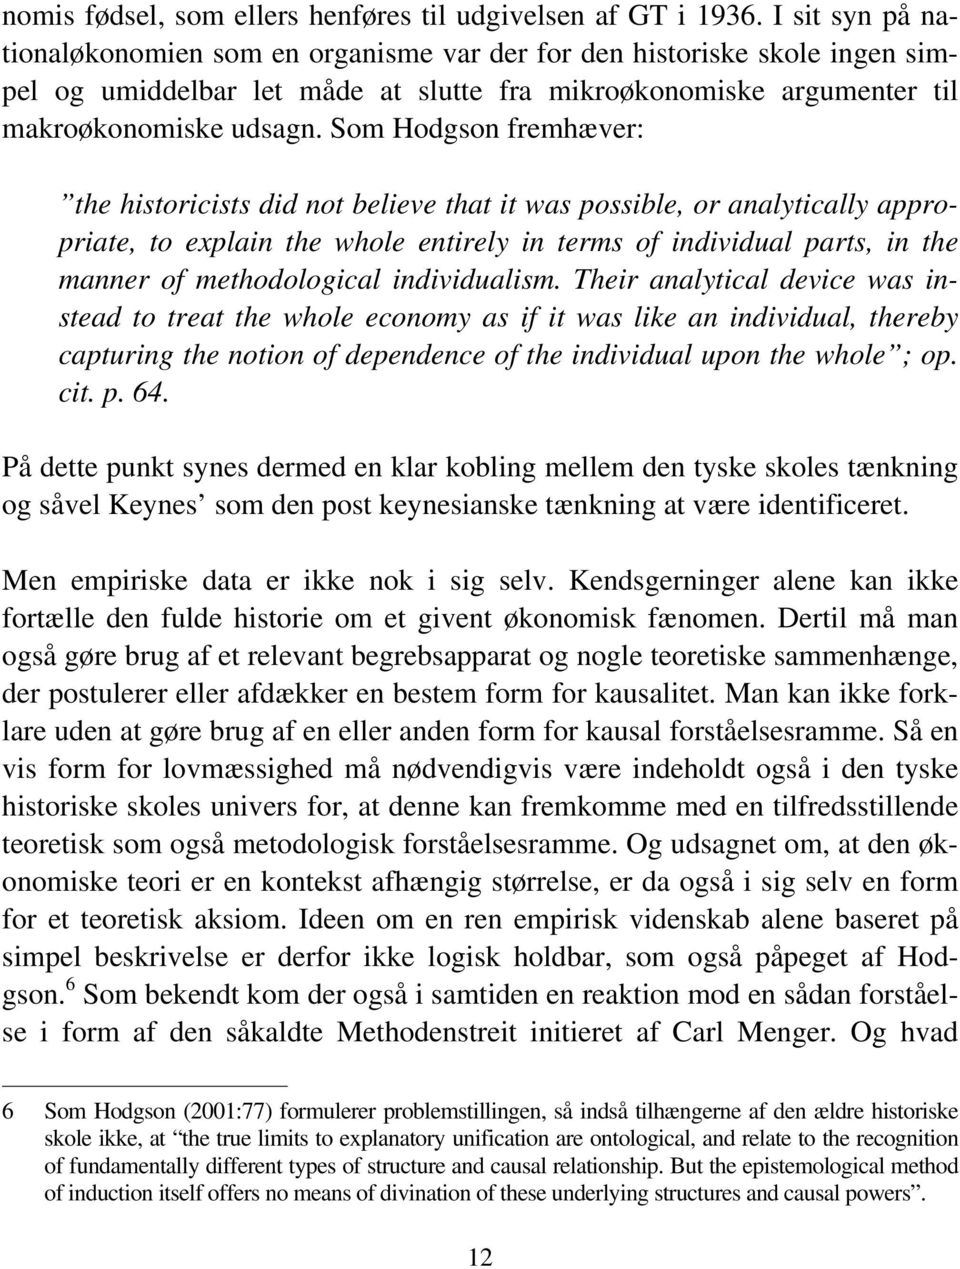 Som Hodgson fremhæver: the historicists did not believe that it was possible, or analytically appropriate, to explain the whole entirely in terms of individual parts, in the manner of methodological